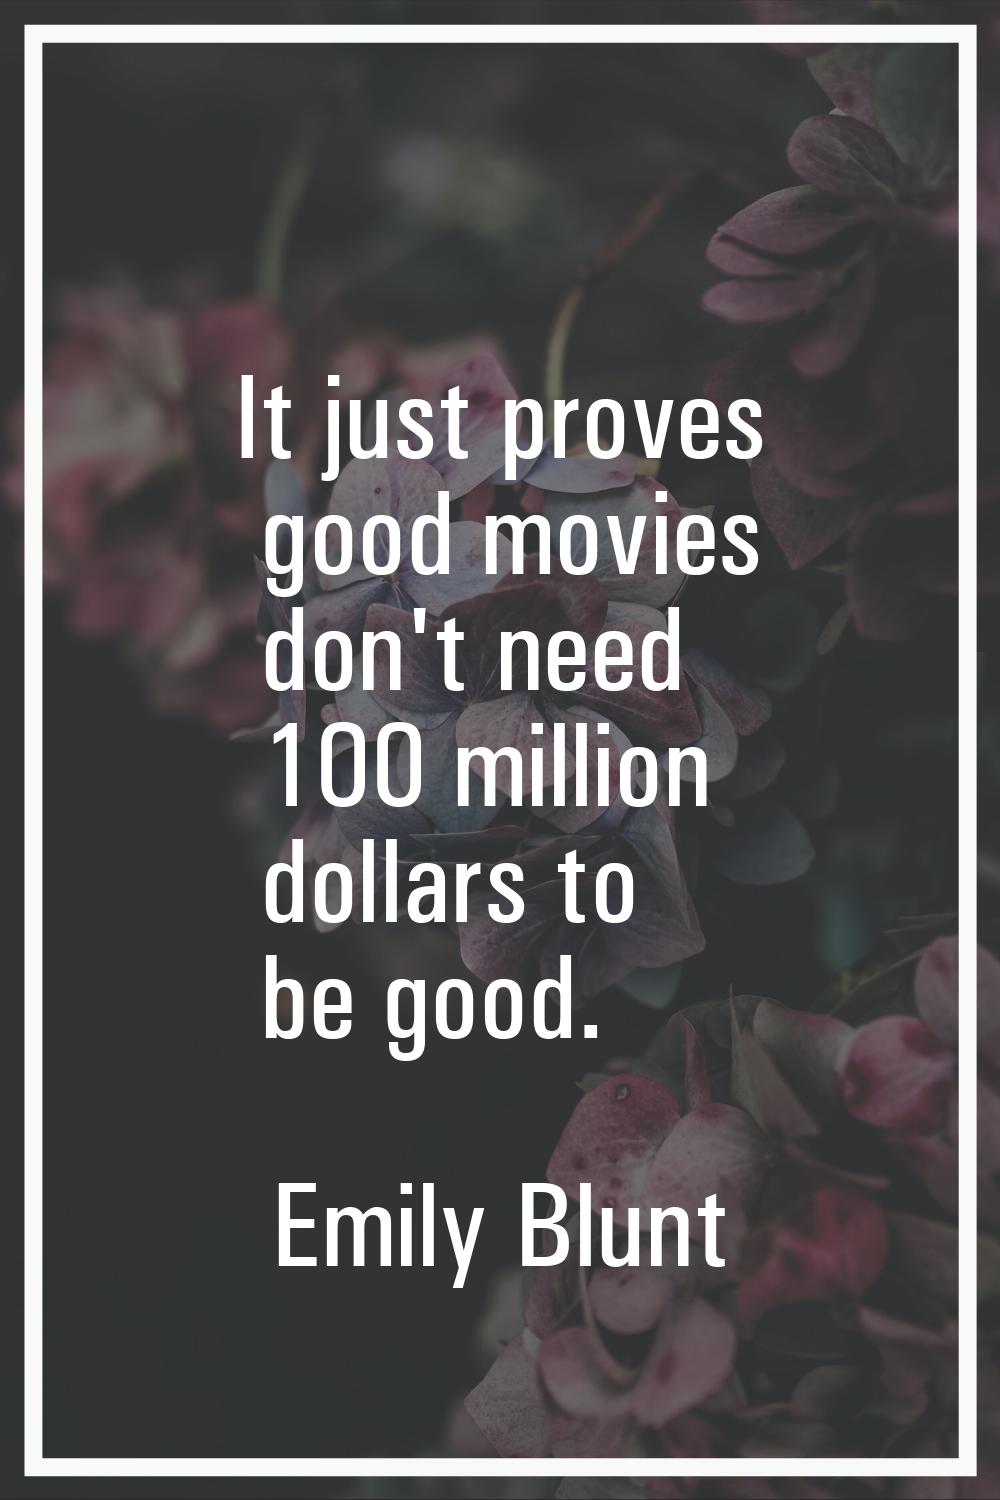 It just proves good movies don't need 100 million dollars to be good.